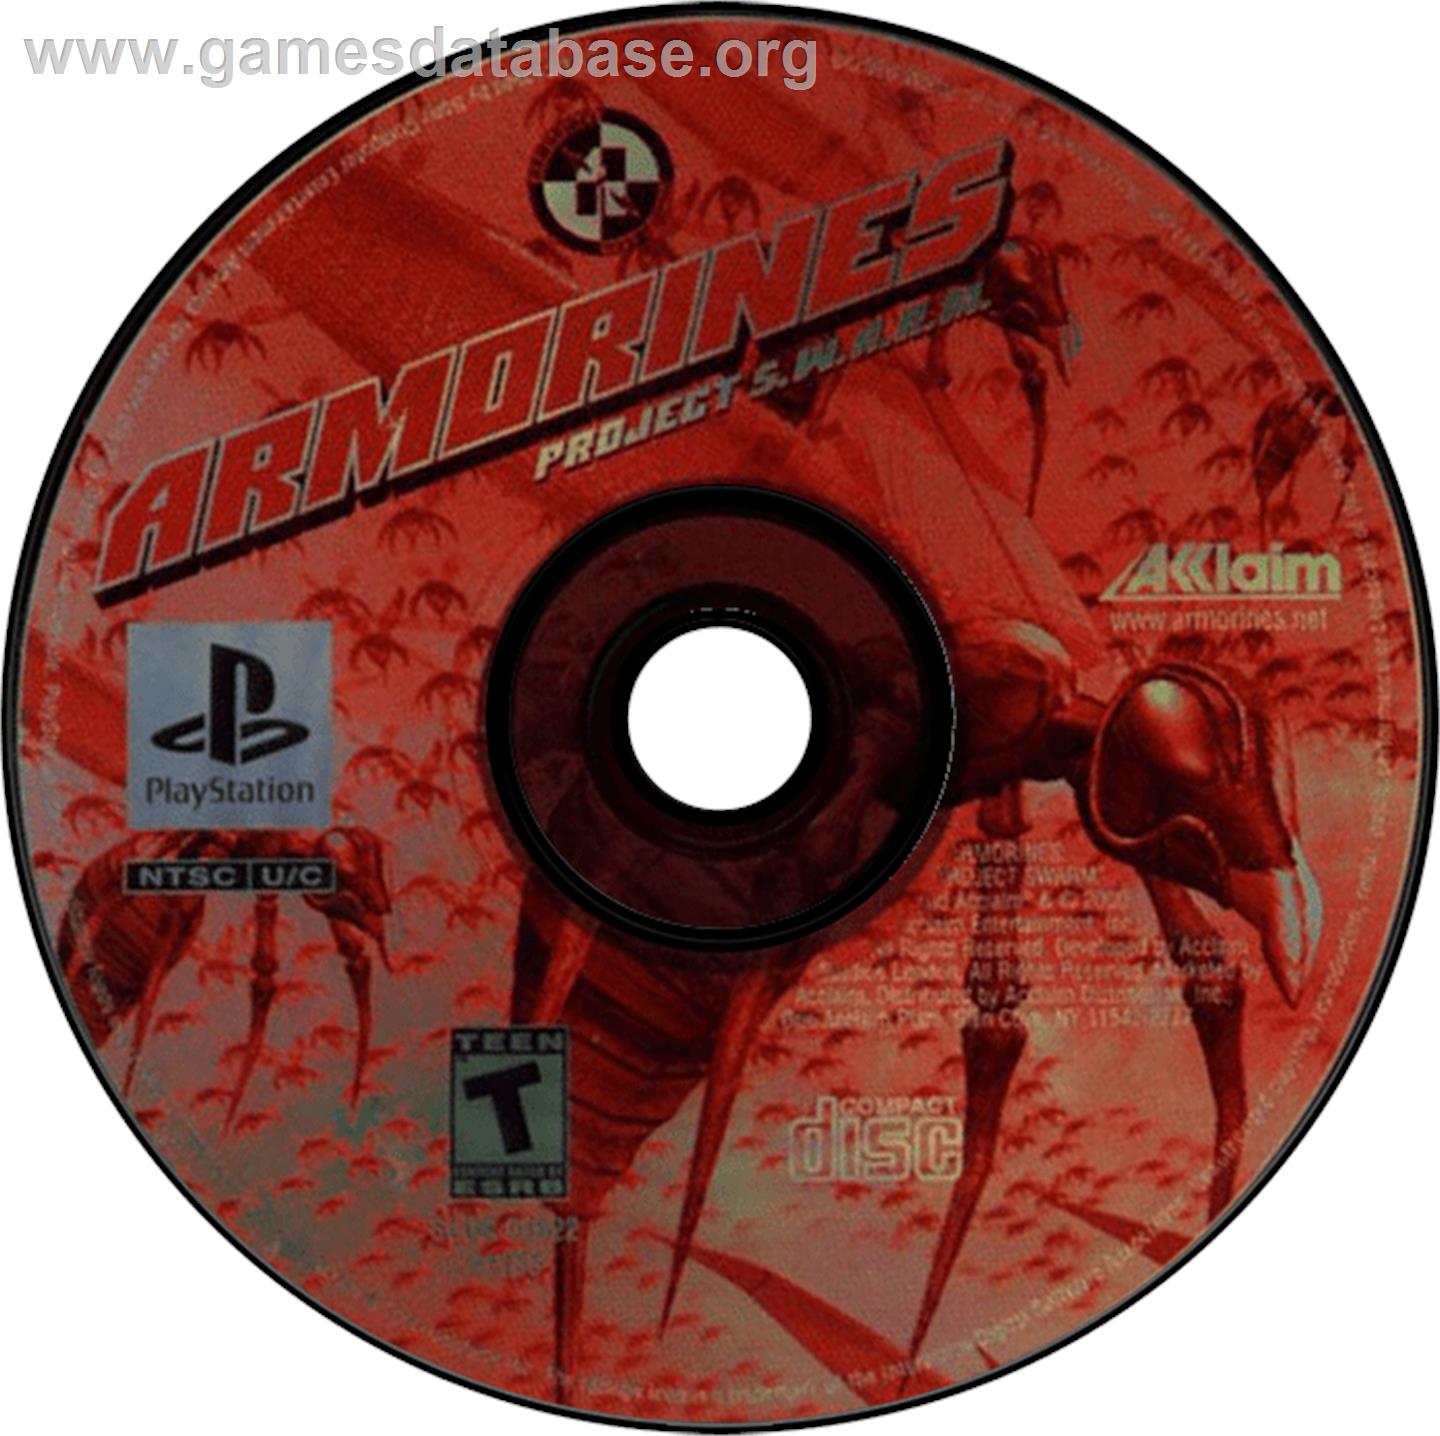 Armorines: Project S.W.A.R.M. - Sony Playstation - Artwork - Disc